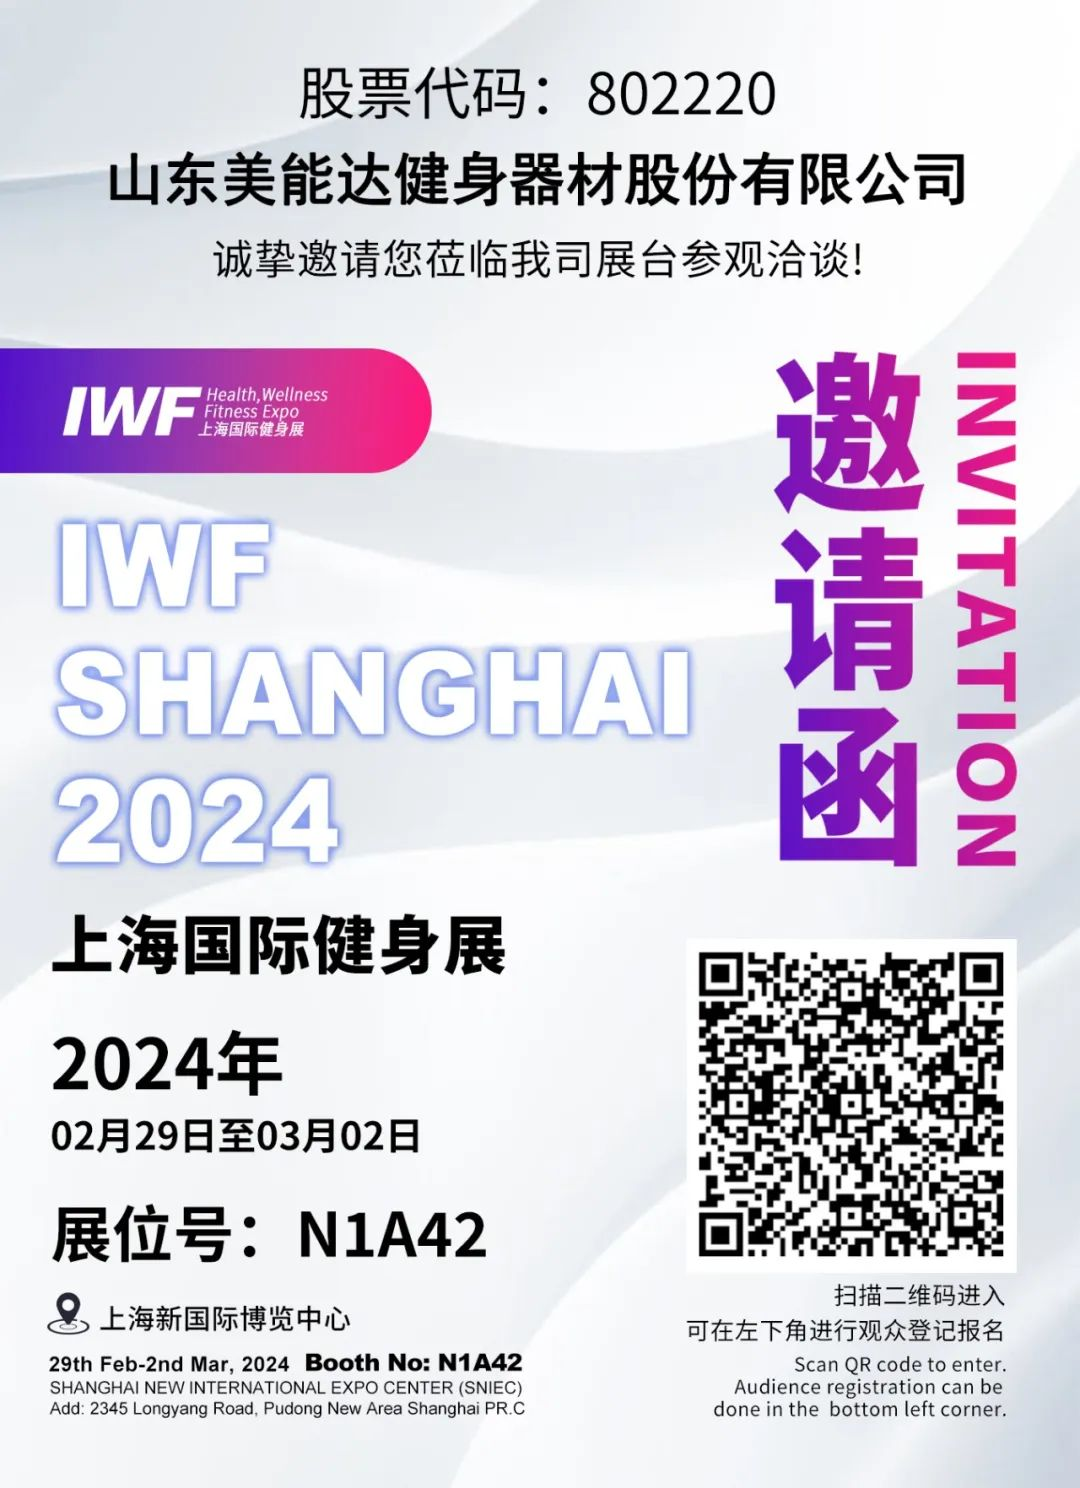 Minolta cordially invites you to visit booth N1A42 for negotiation at the 2024 Shanghai International Fitness Exhibition